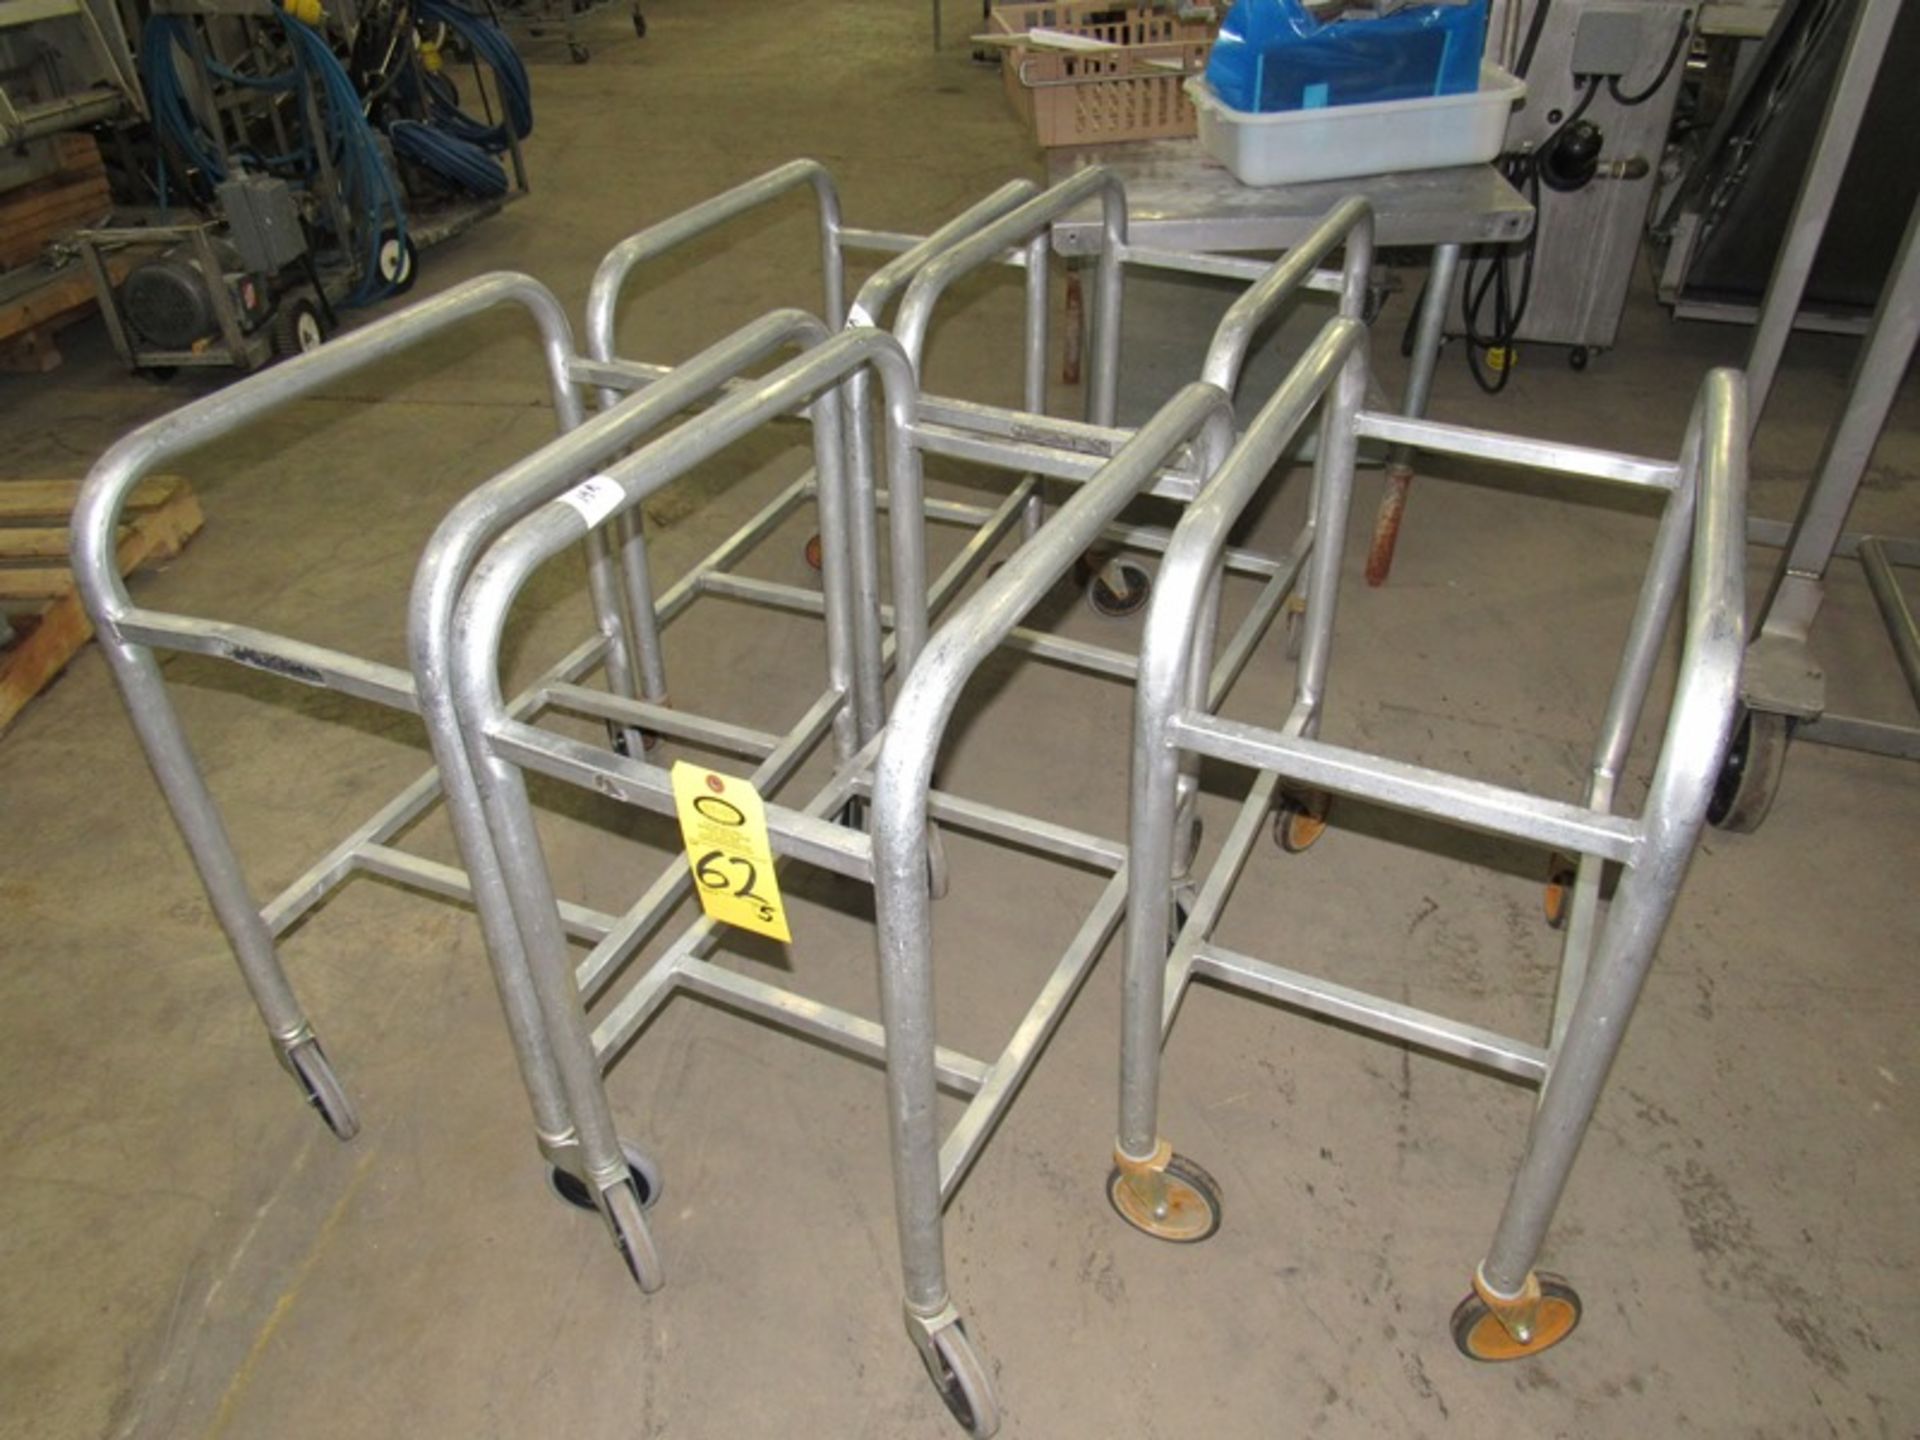 Aluminum Tote Racks, 17" W X 28" L X 33" T;*** All Funds Must Be Received By Friday, January 17th,